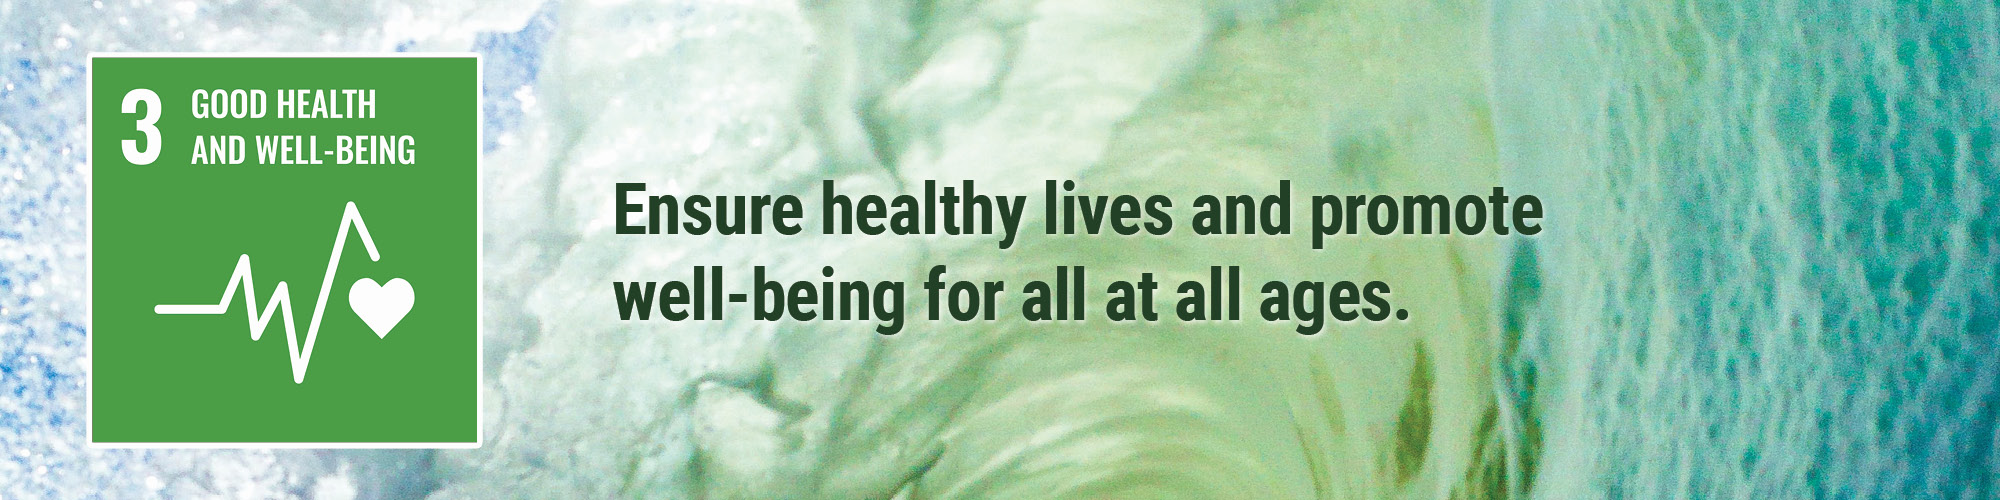 Ensure healthy lives and promote well-being for all at all ages.